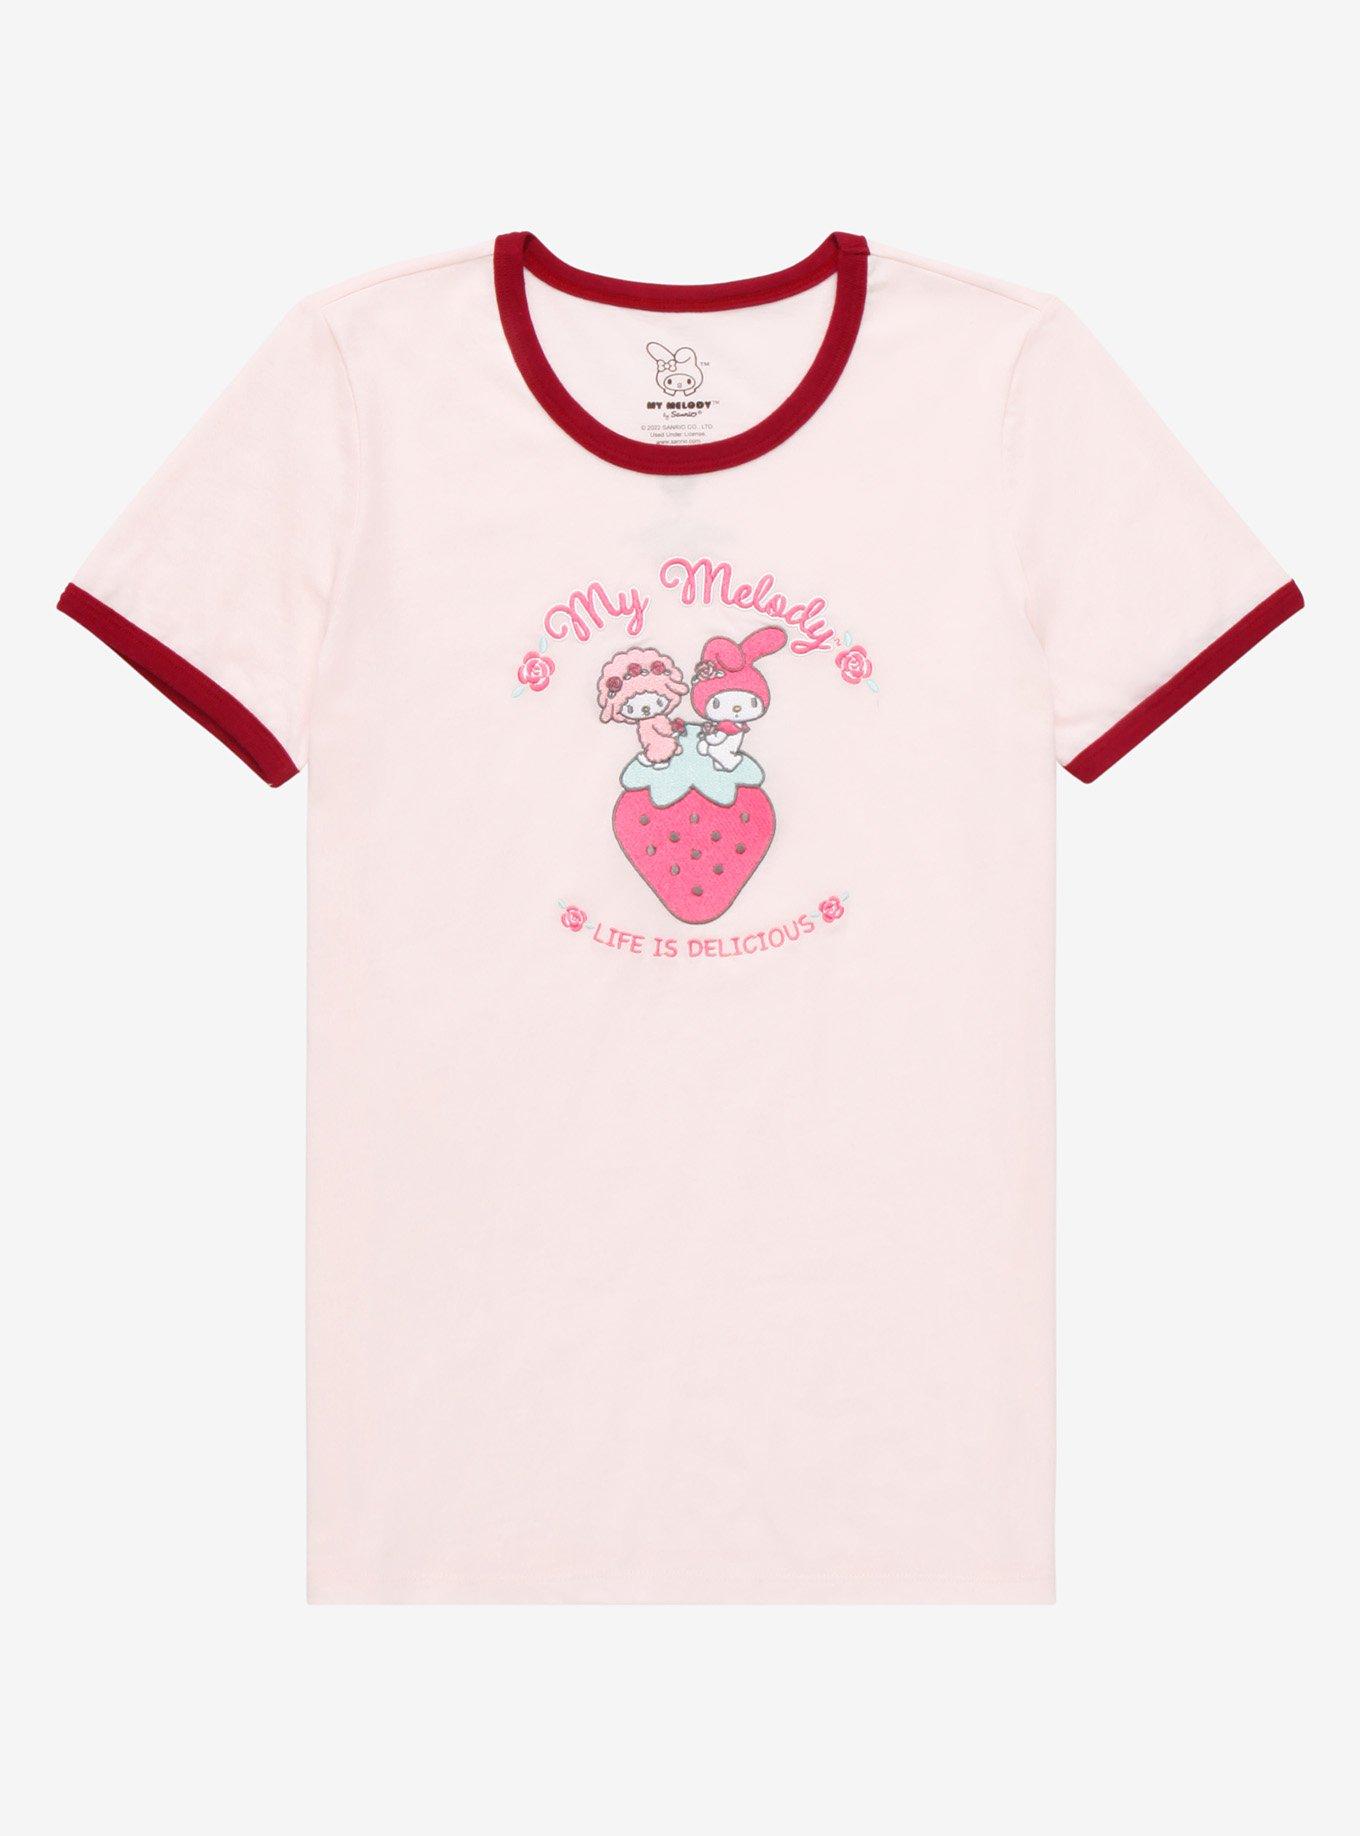 Sanrio is & BoxLunch T-Shirt Exclusive My - Piano Women\'s BoxLunch Delicious My Sweet Ringer Life Melody |